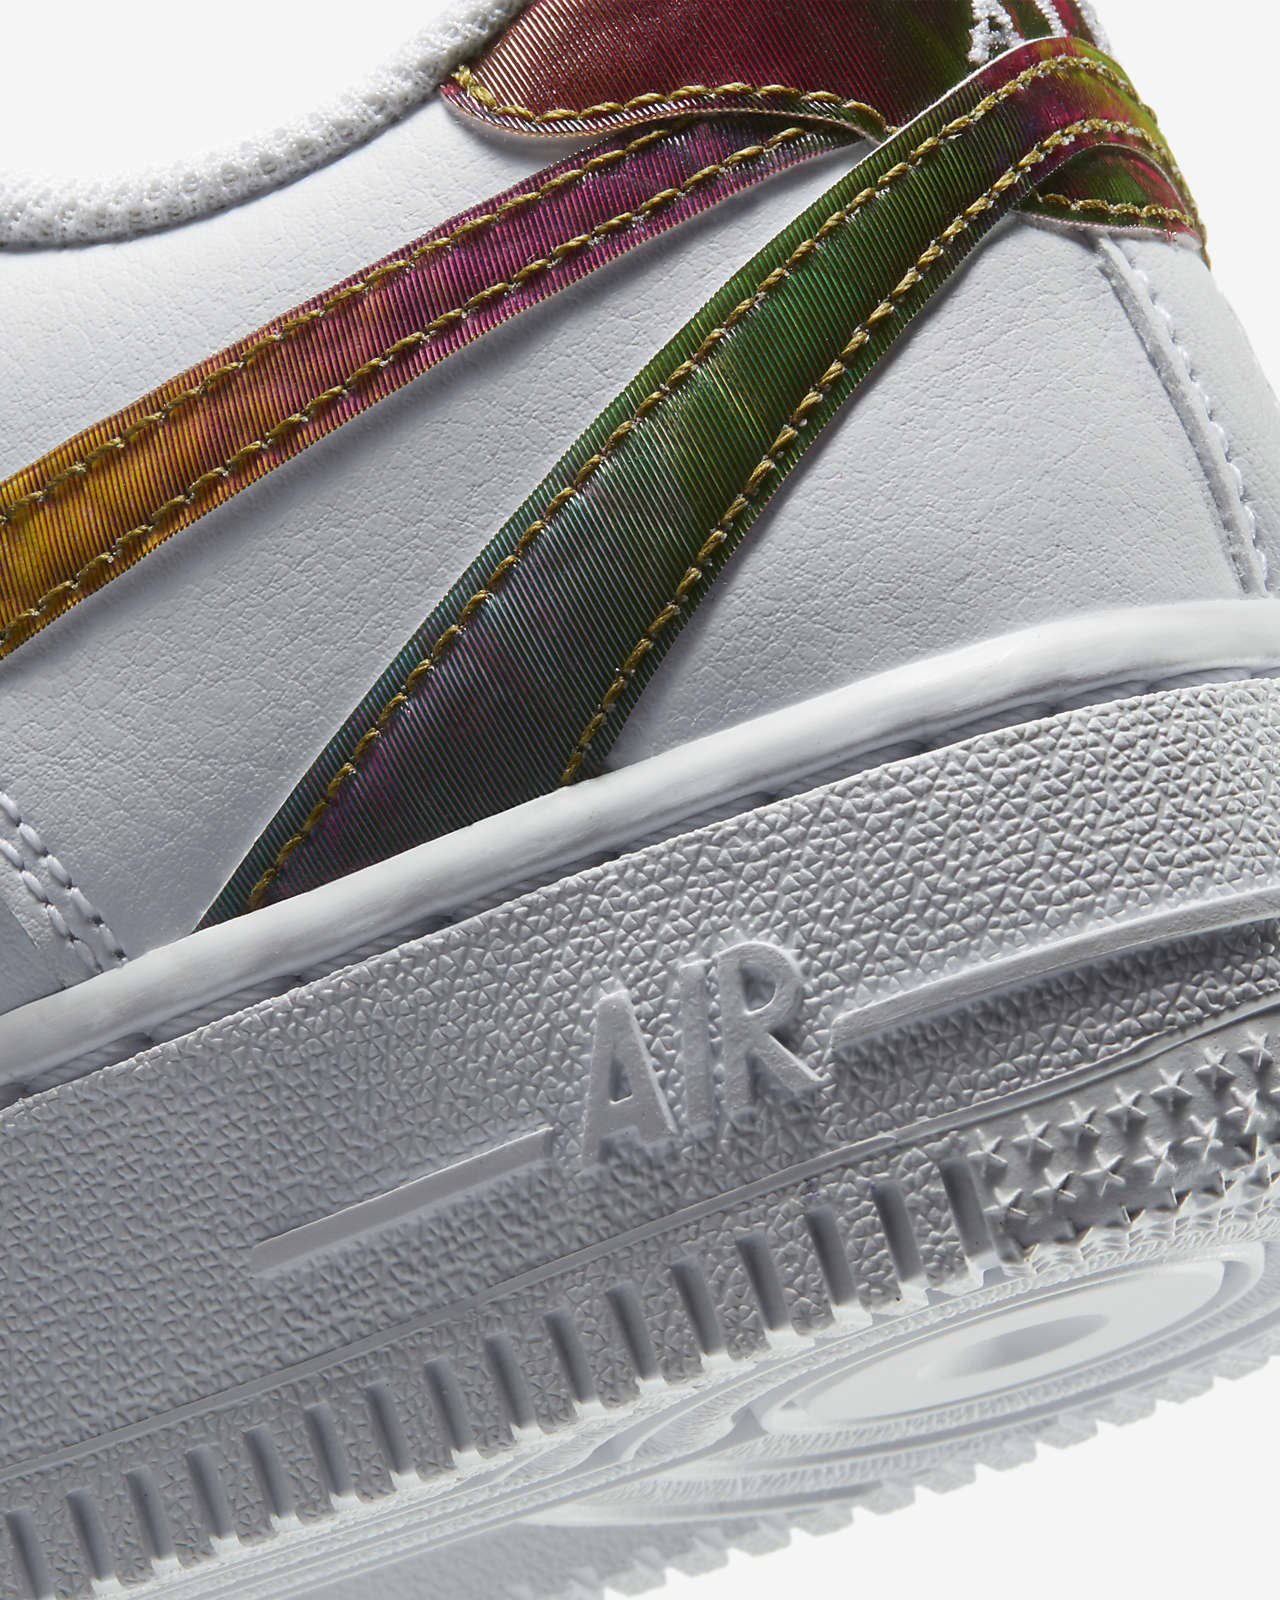 nike air force 1 lv8 multicolor